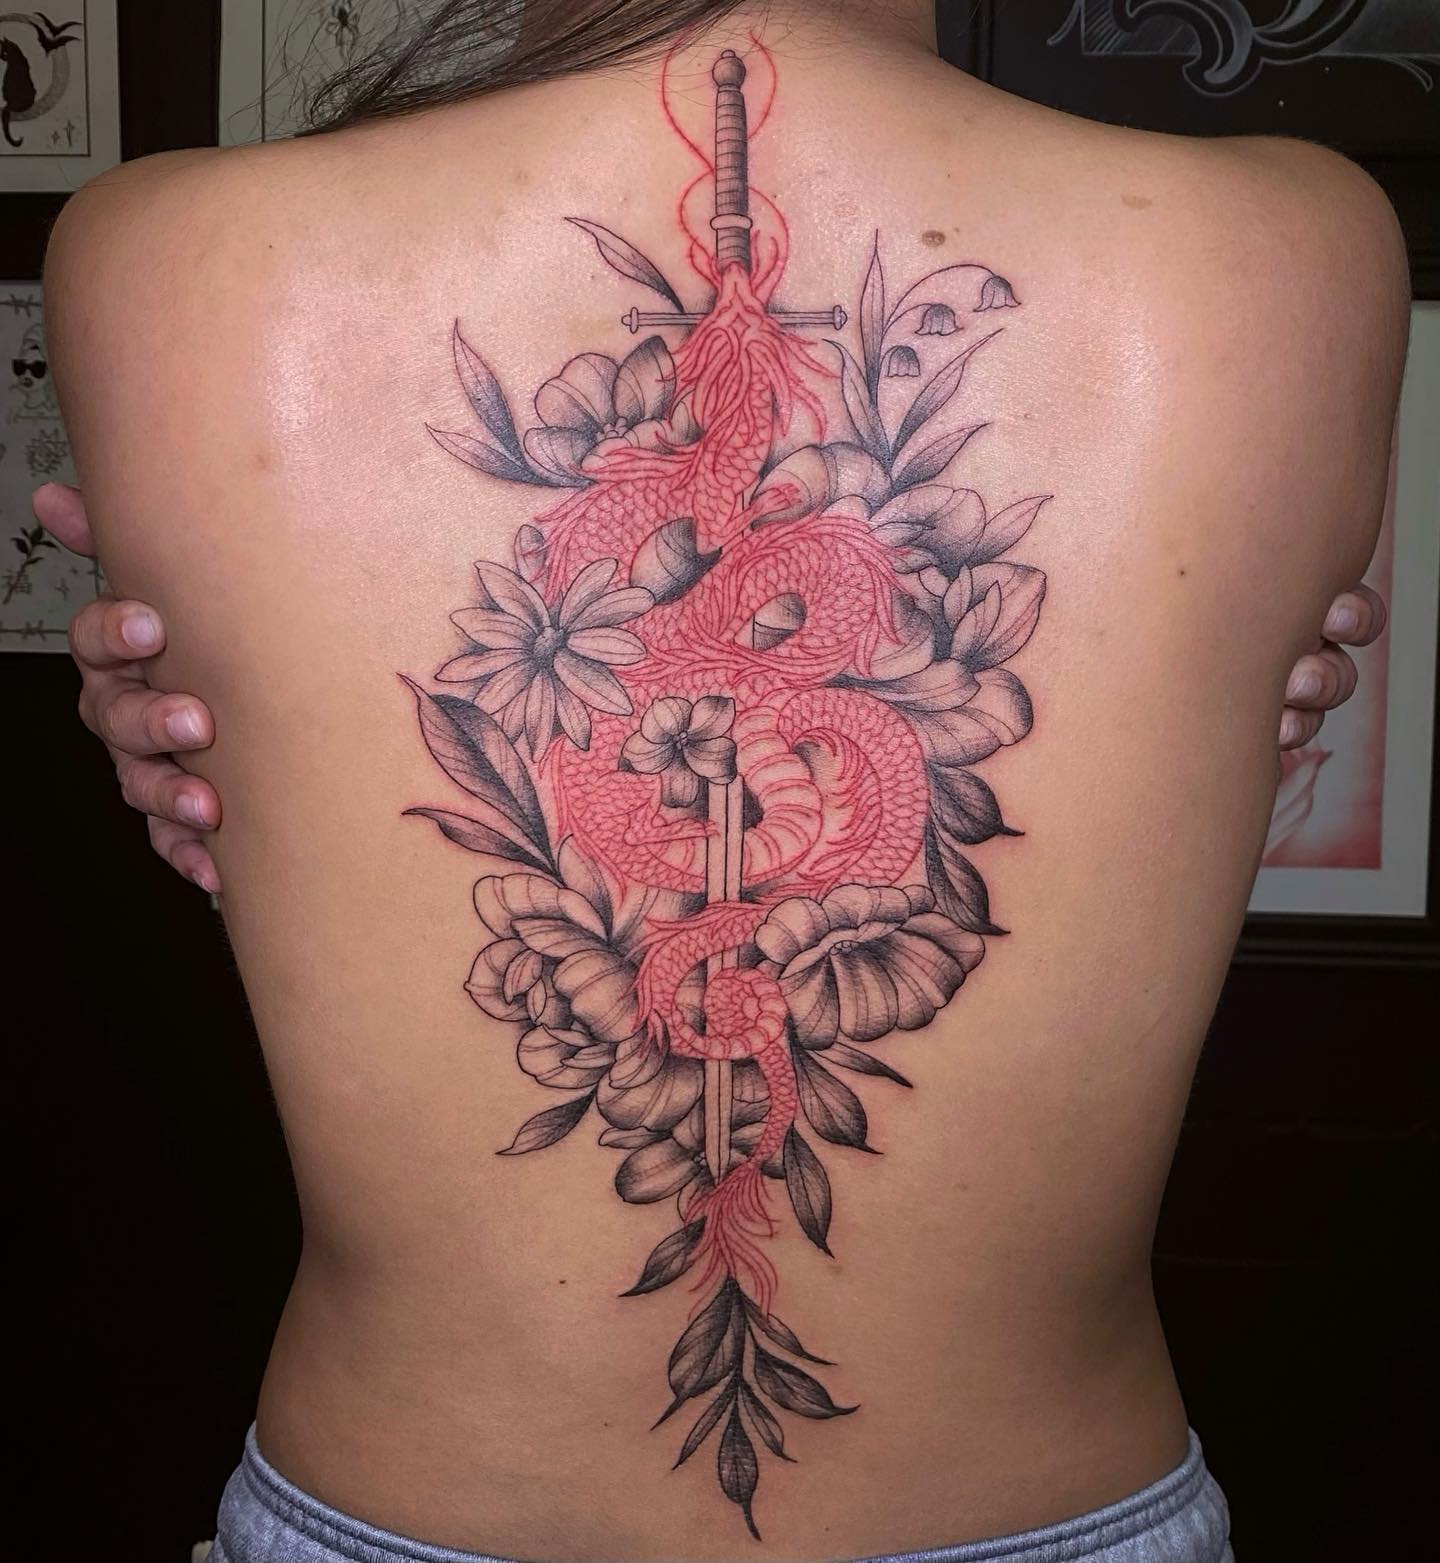 30+ Spine Tattoos for Women: Top Ideas and Designs of 2023